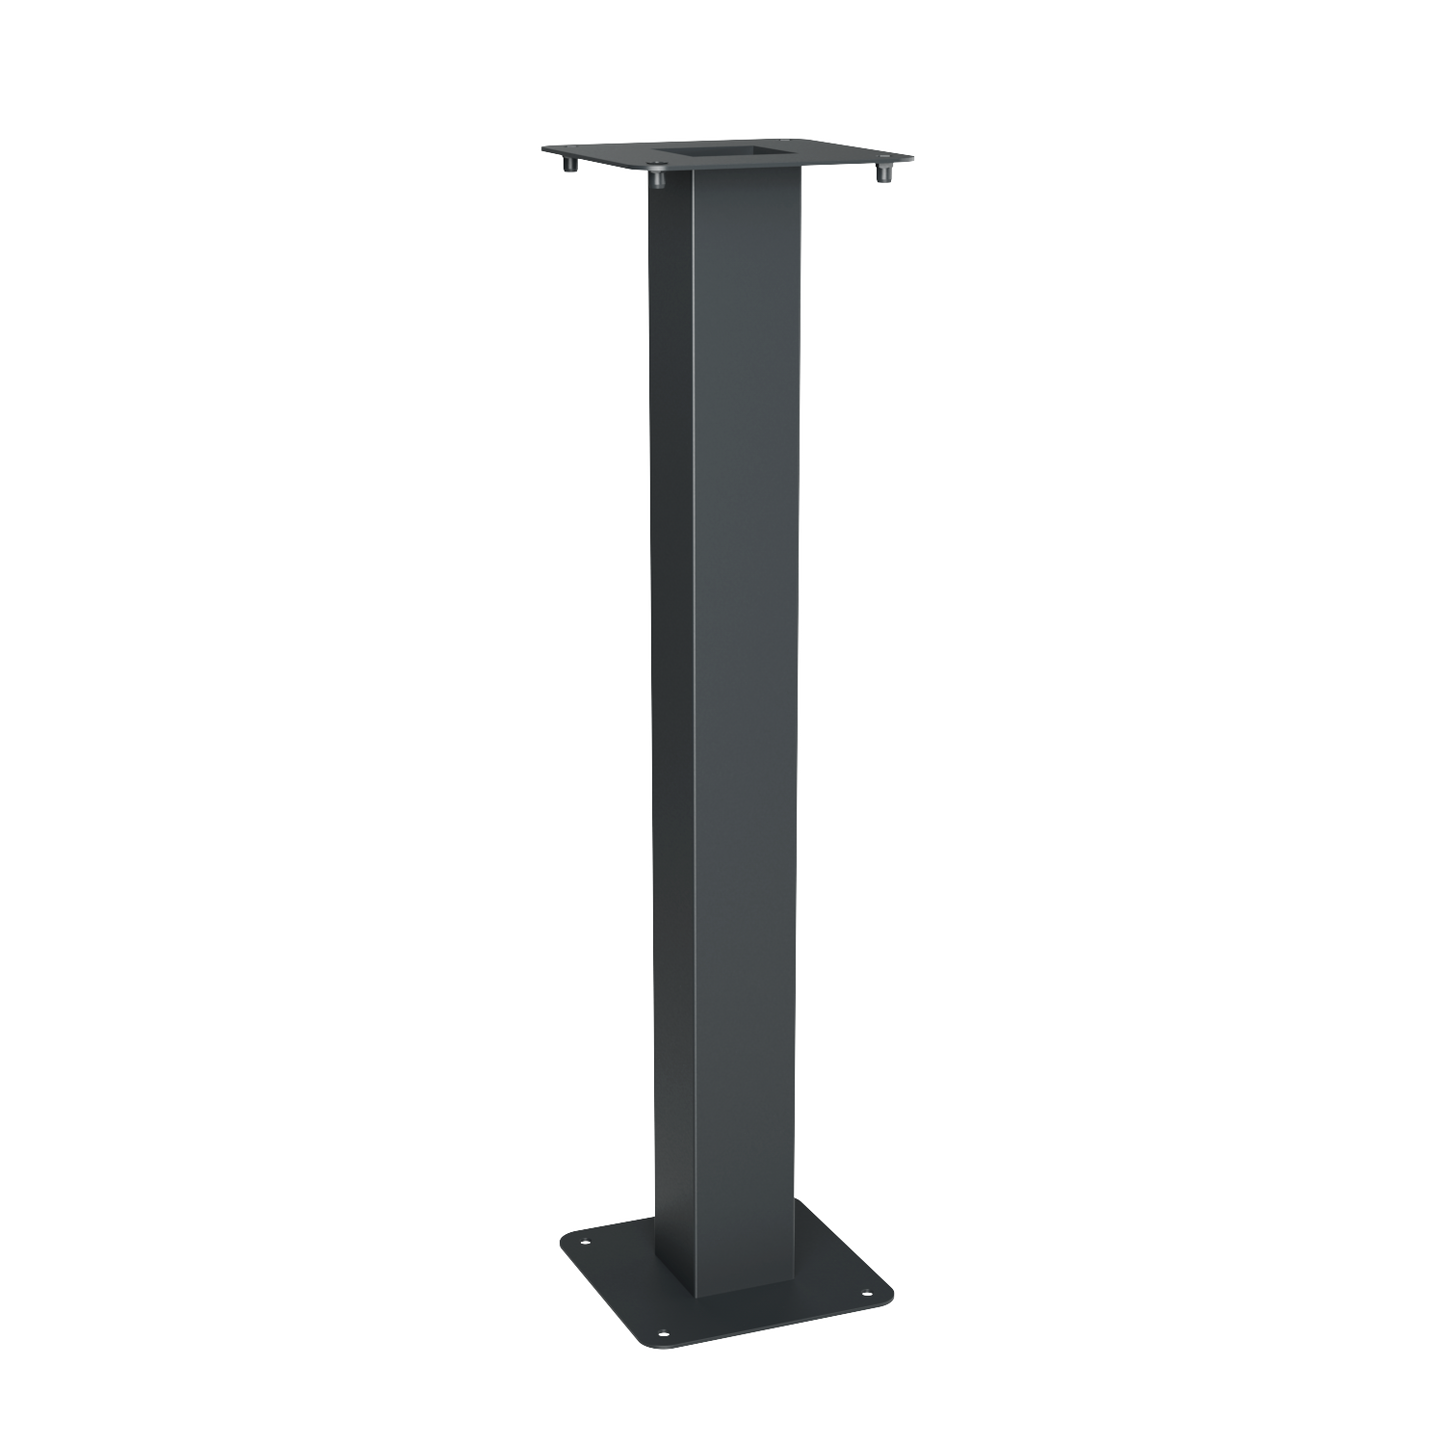 Post for TOWN SQUARE Mailbox by Bravios - in black, white, anthracite and gray